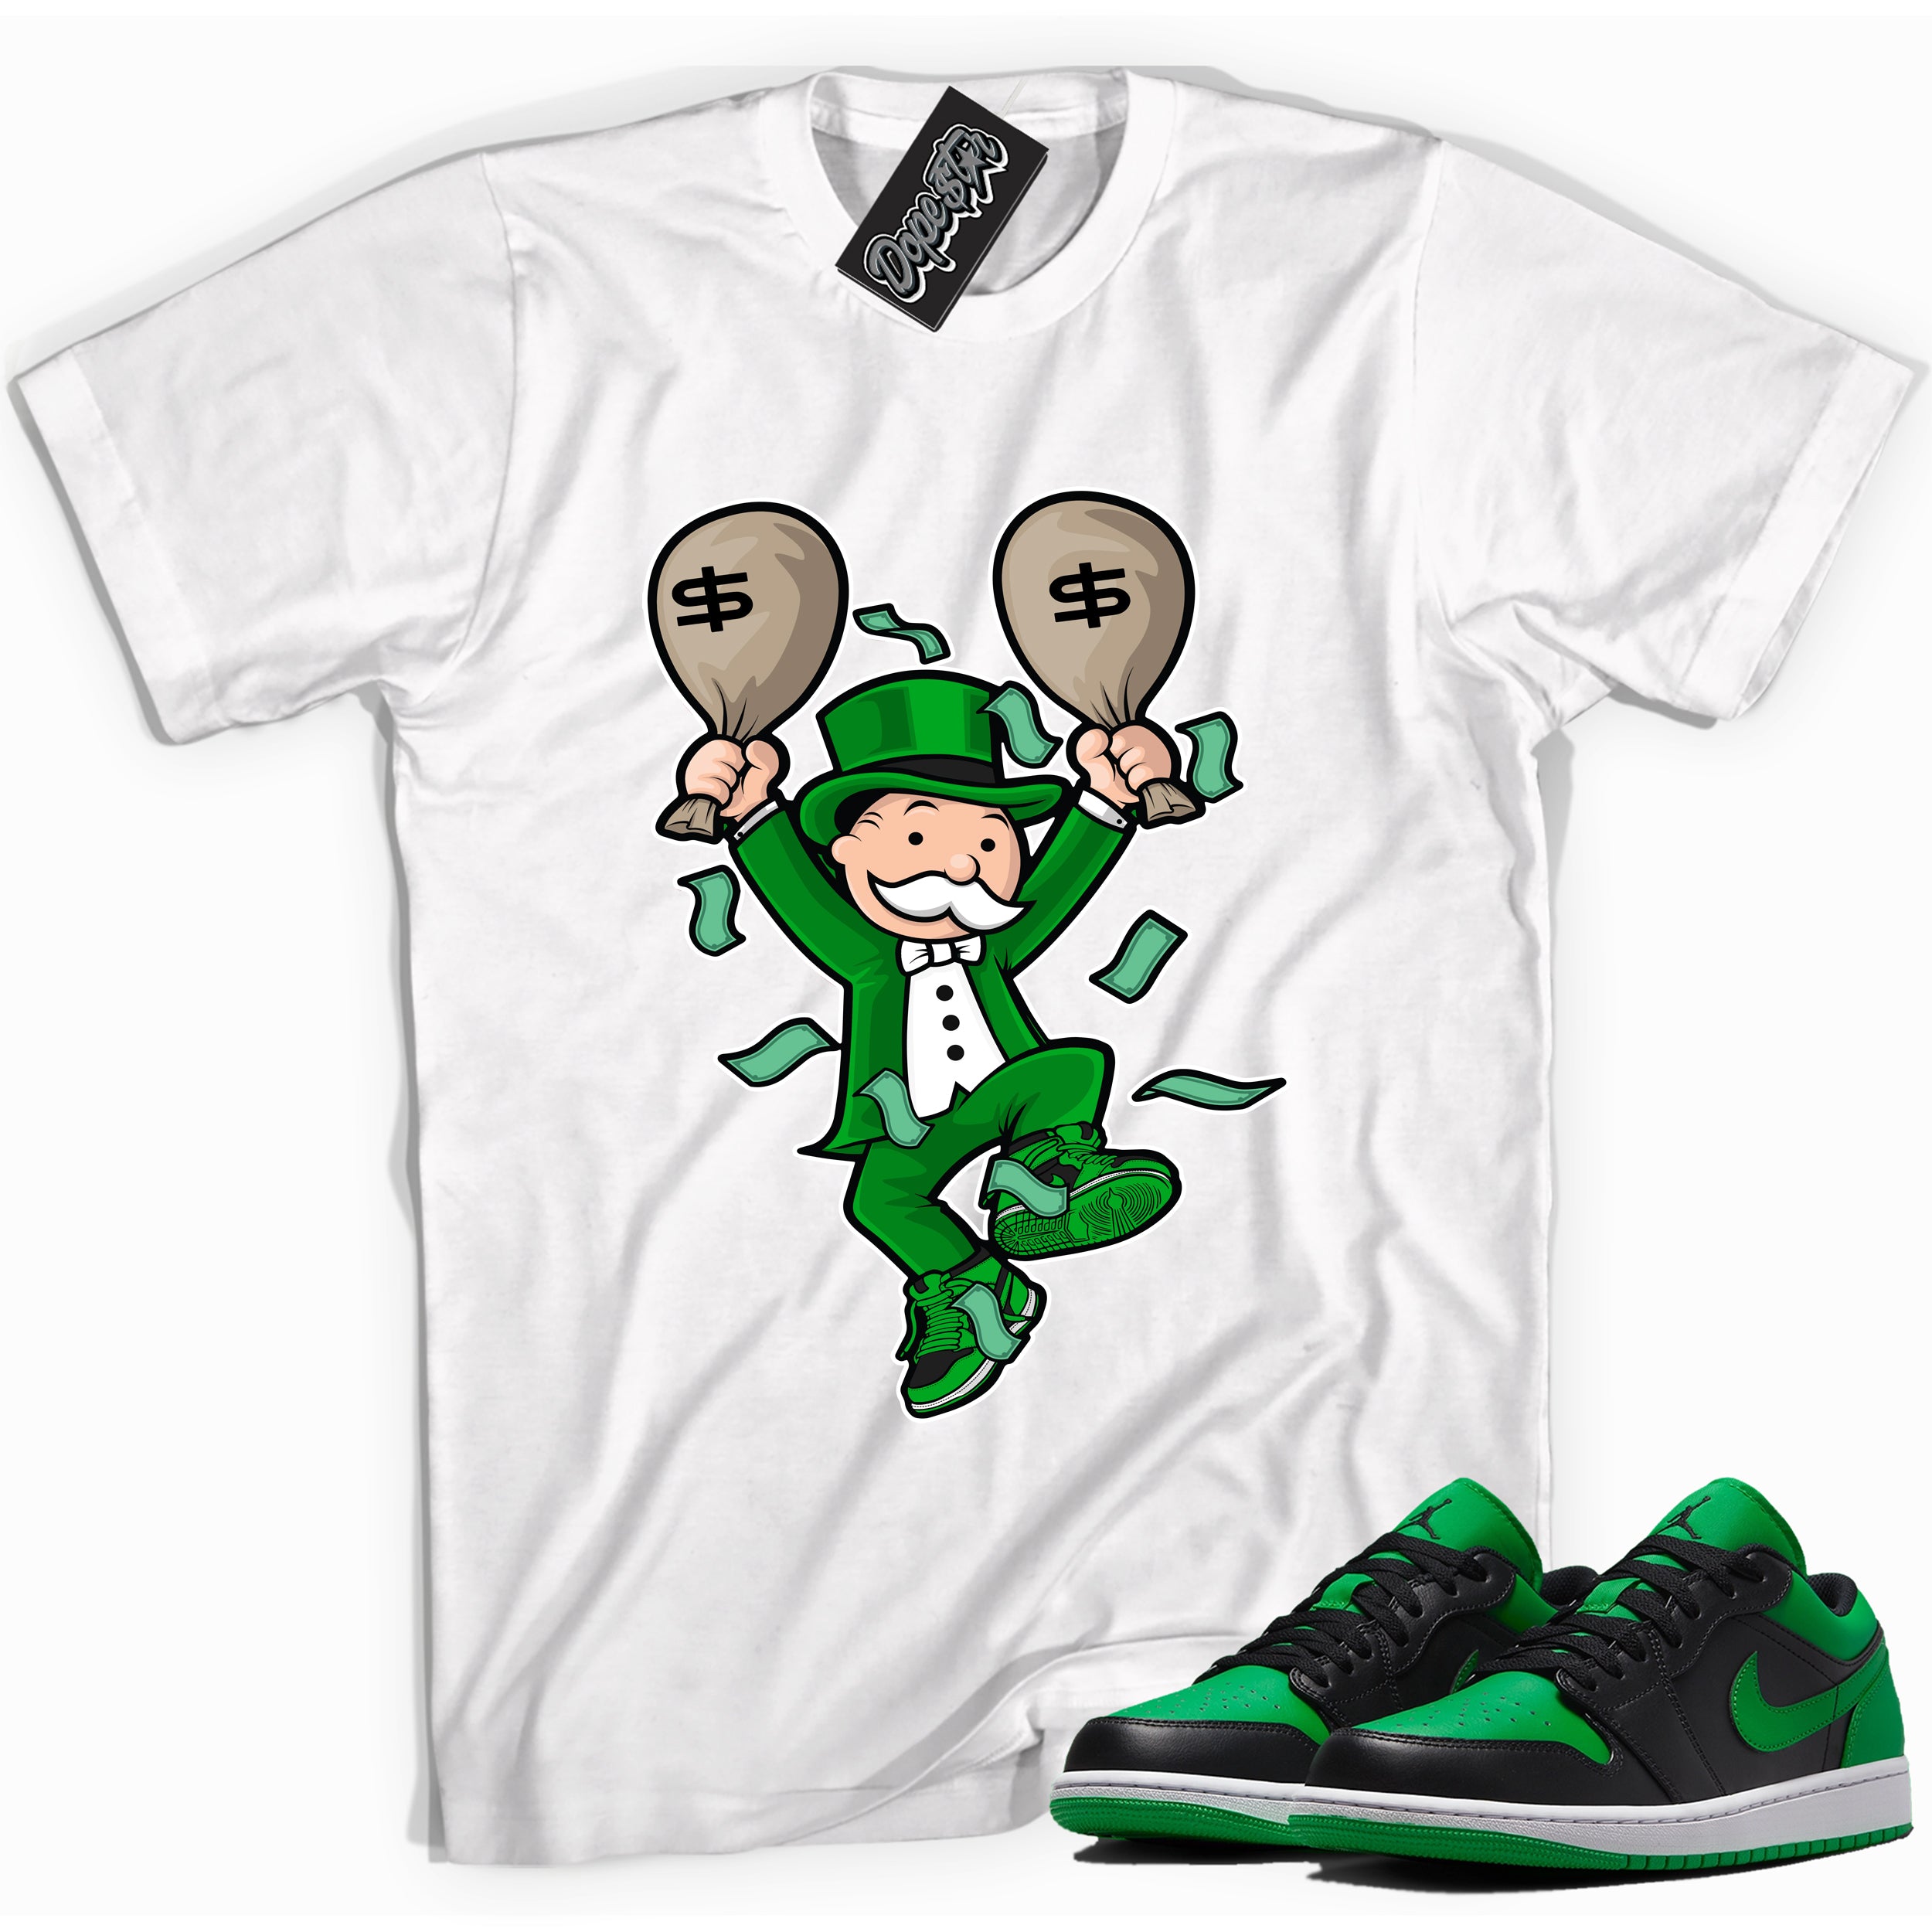 Cool white graphic tee with 'monopoly man' print, that perfectly matches Air Jordan 1 Low Lucky Green sneakers